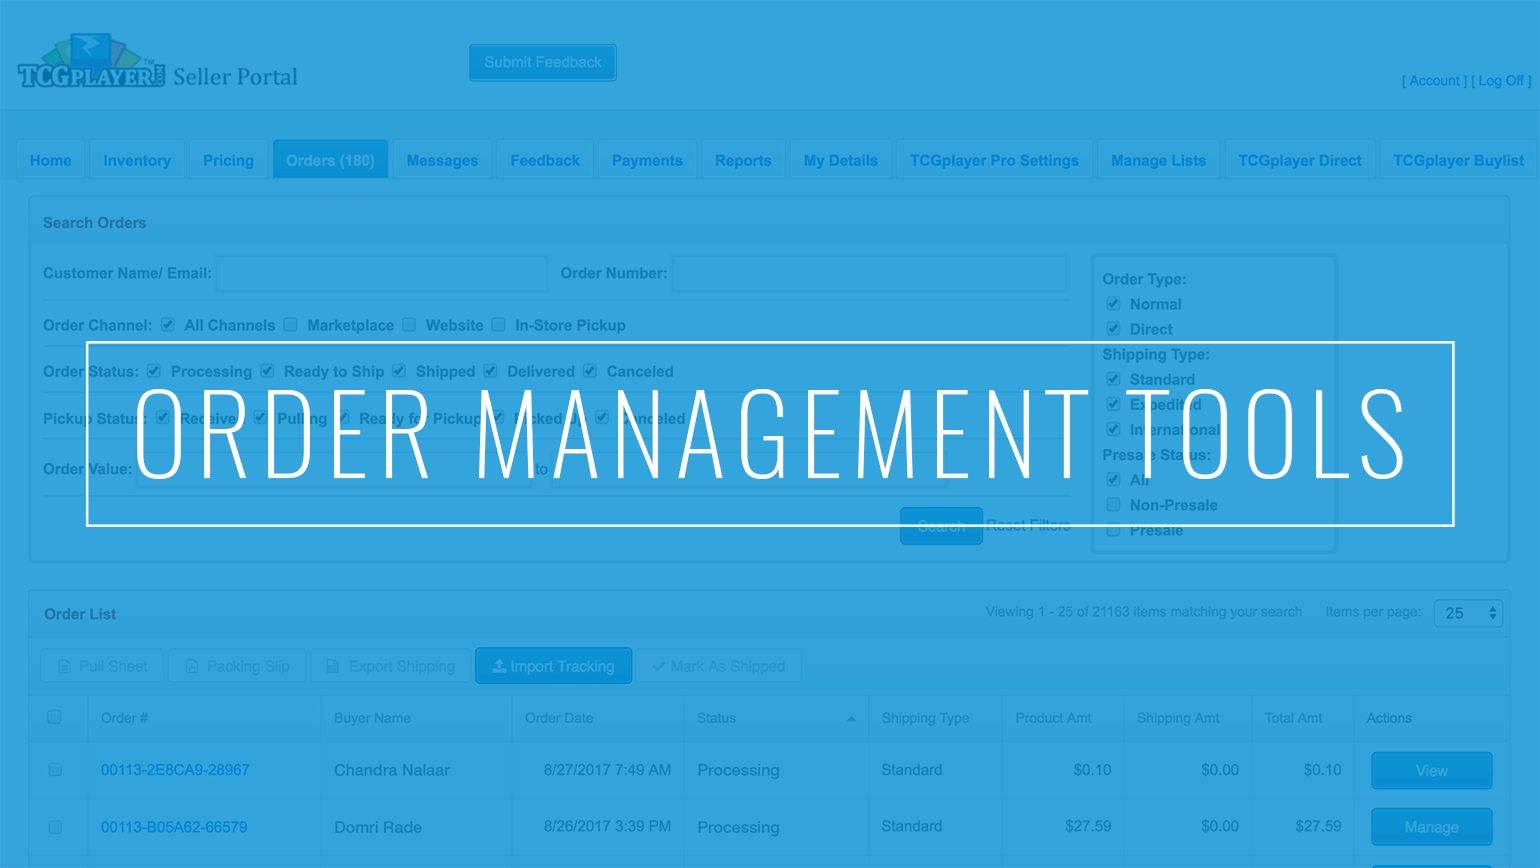 Speed Up Your Workflow with Our Order Management Tools